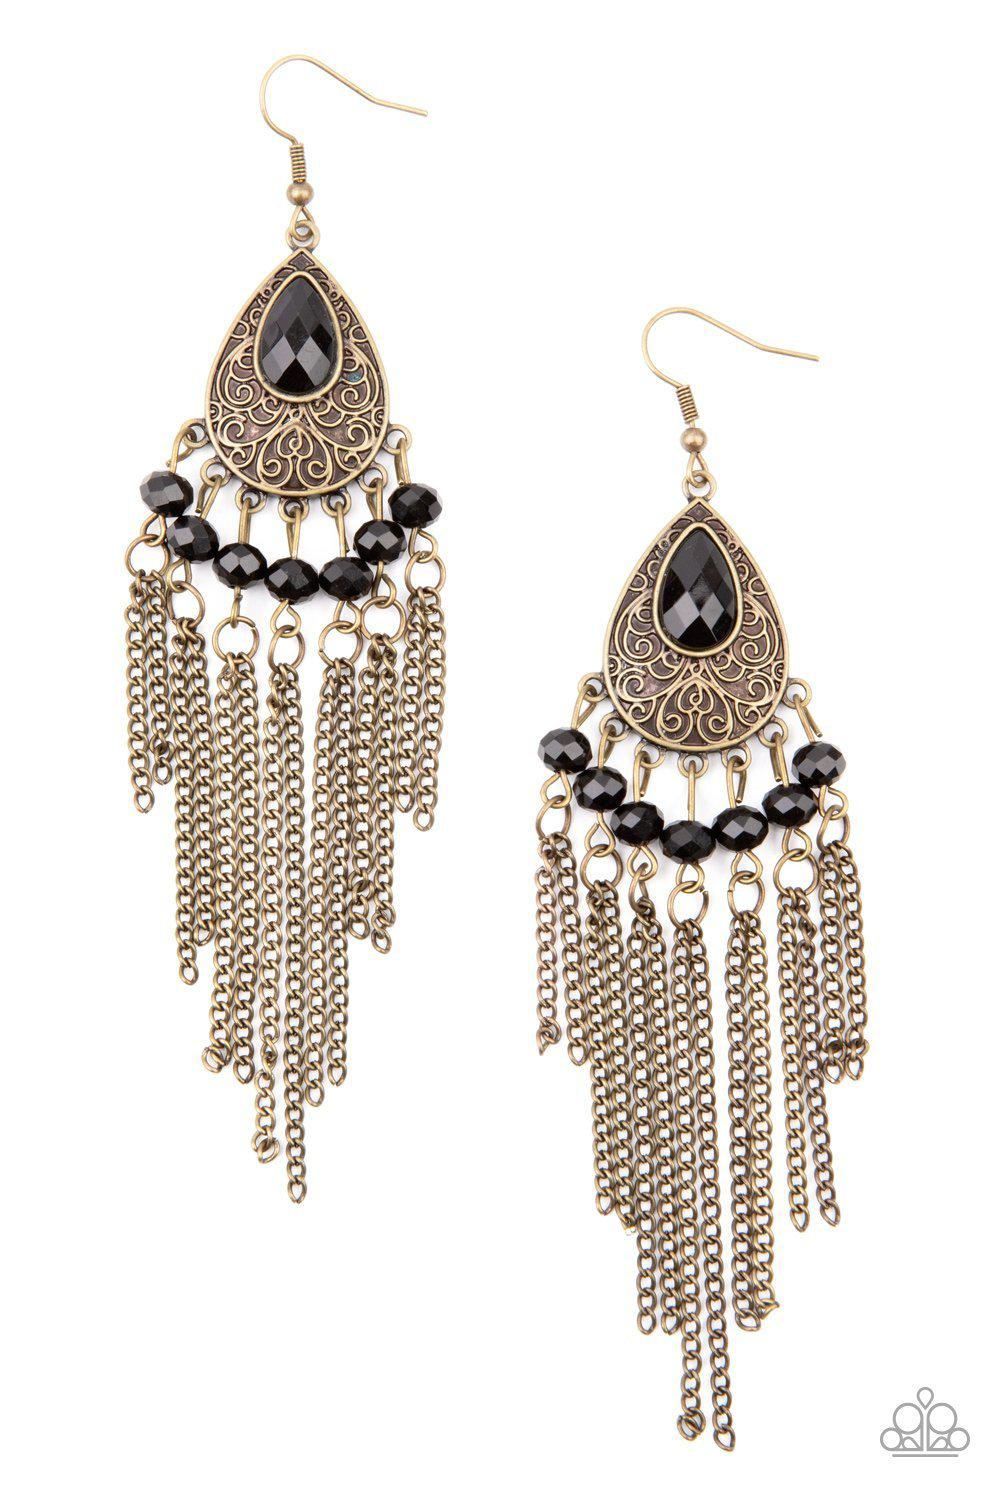 Floating on HEIR Brass and Black Fringe Earrings - Paparazzi Accessories- lightbox - CarasShop.com - $5 Jewelry by Cara Jewels